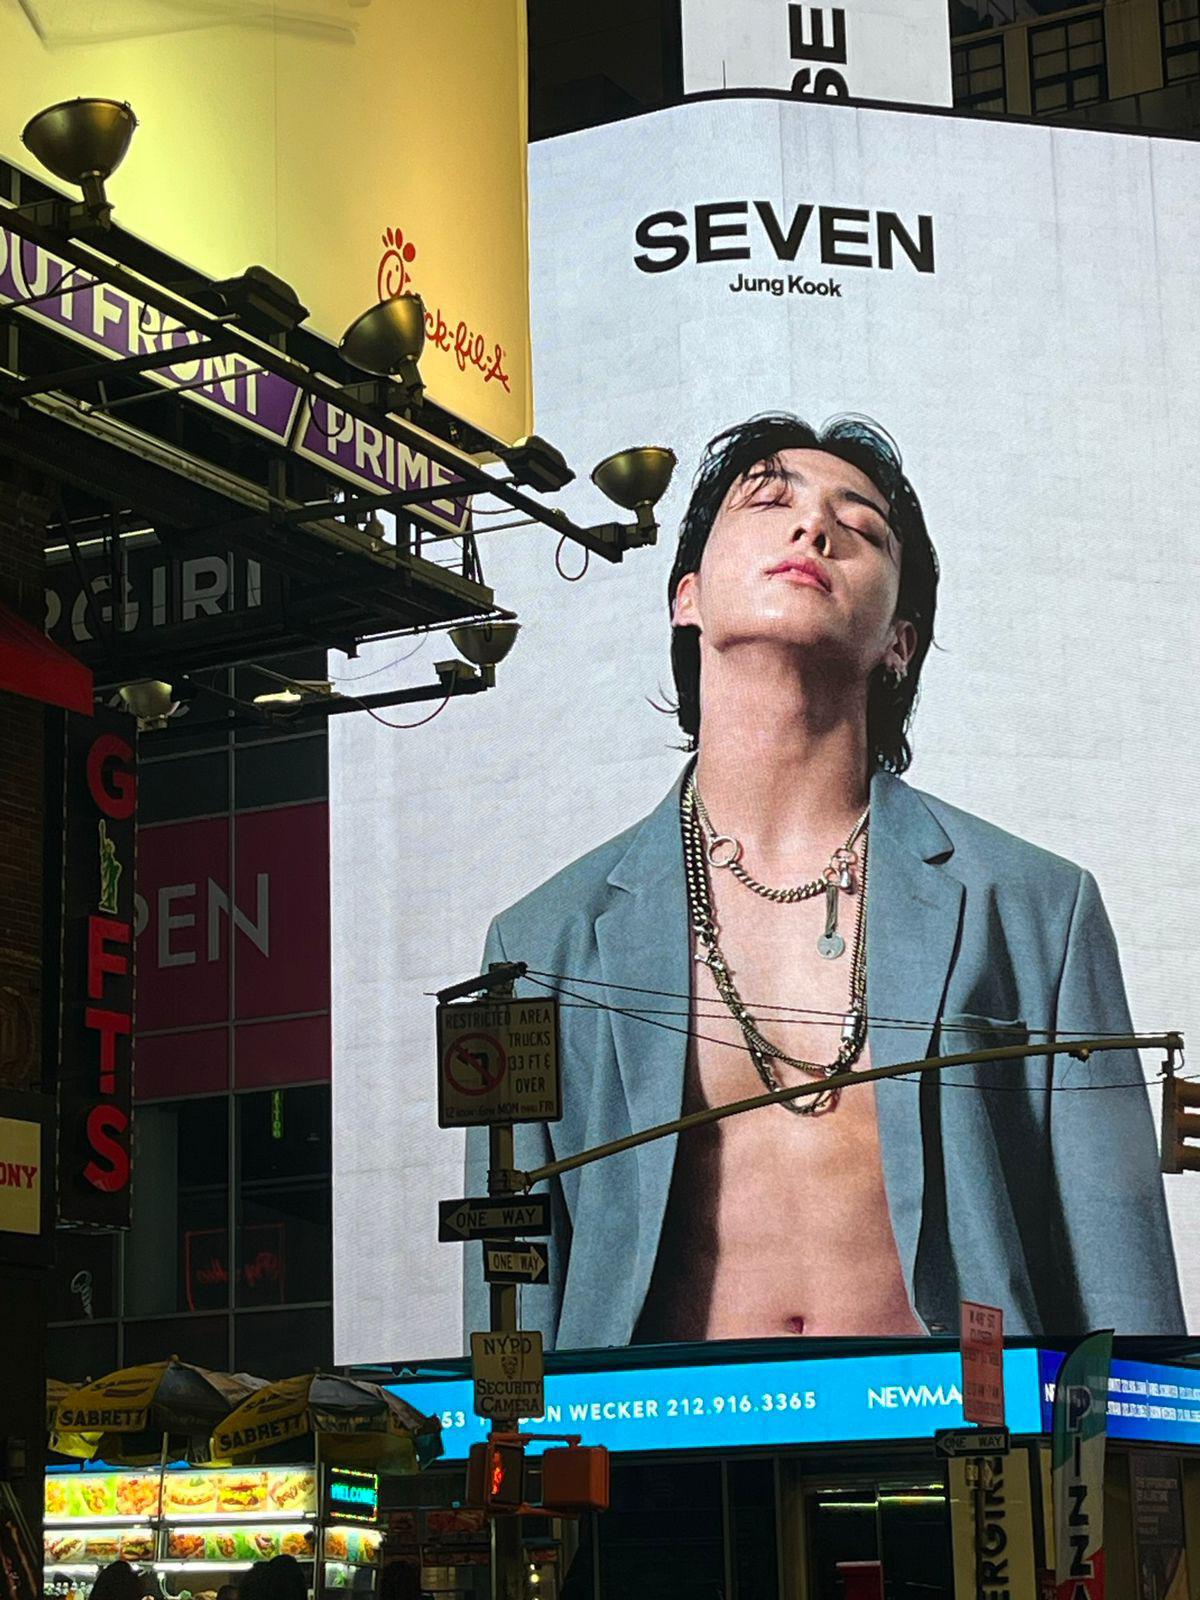 Jungkook’s Seven billboard spotted in Times Square - 110723